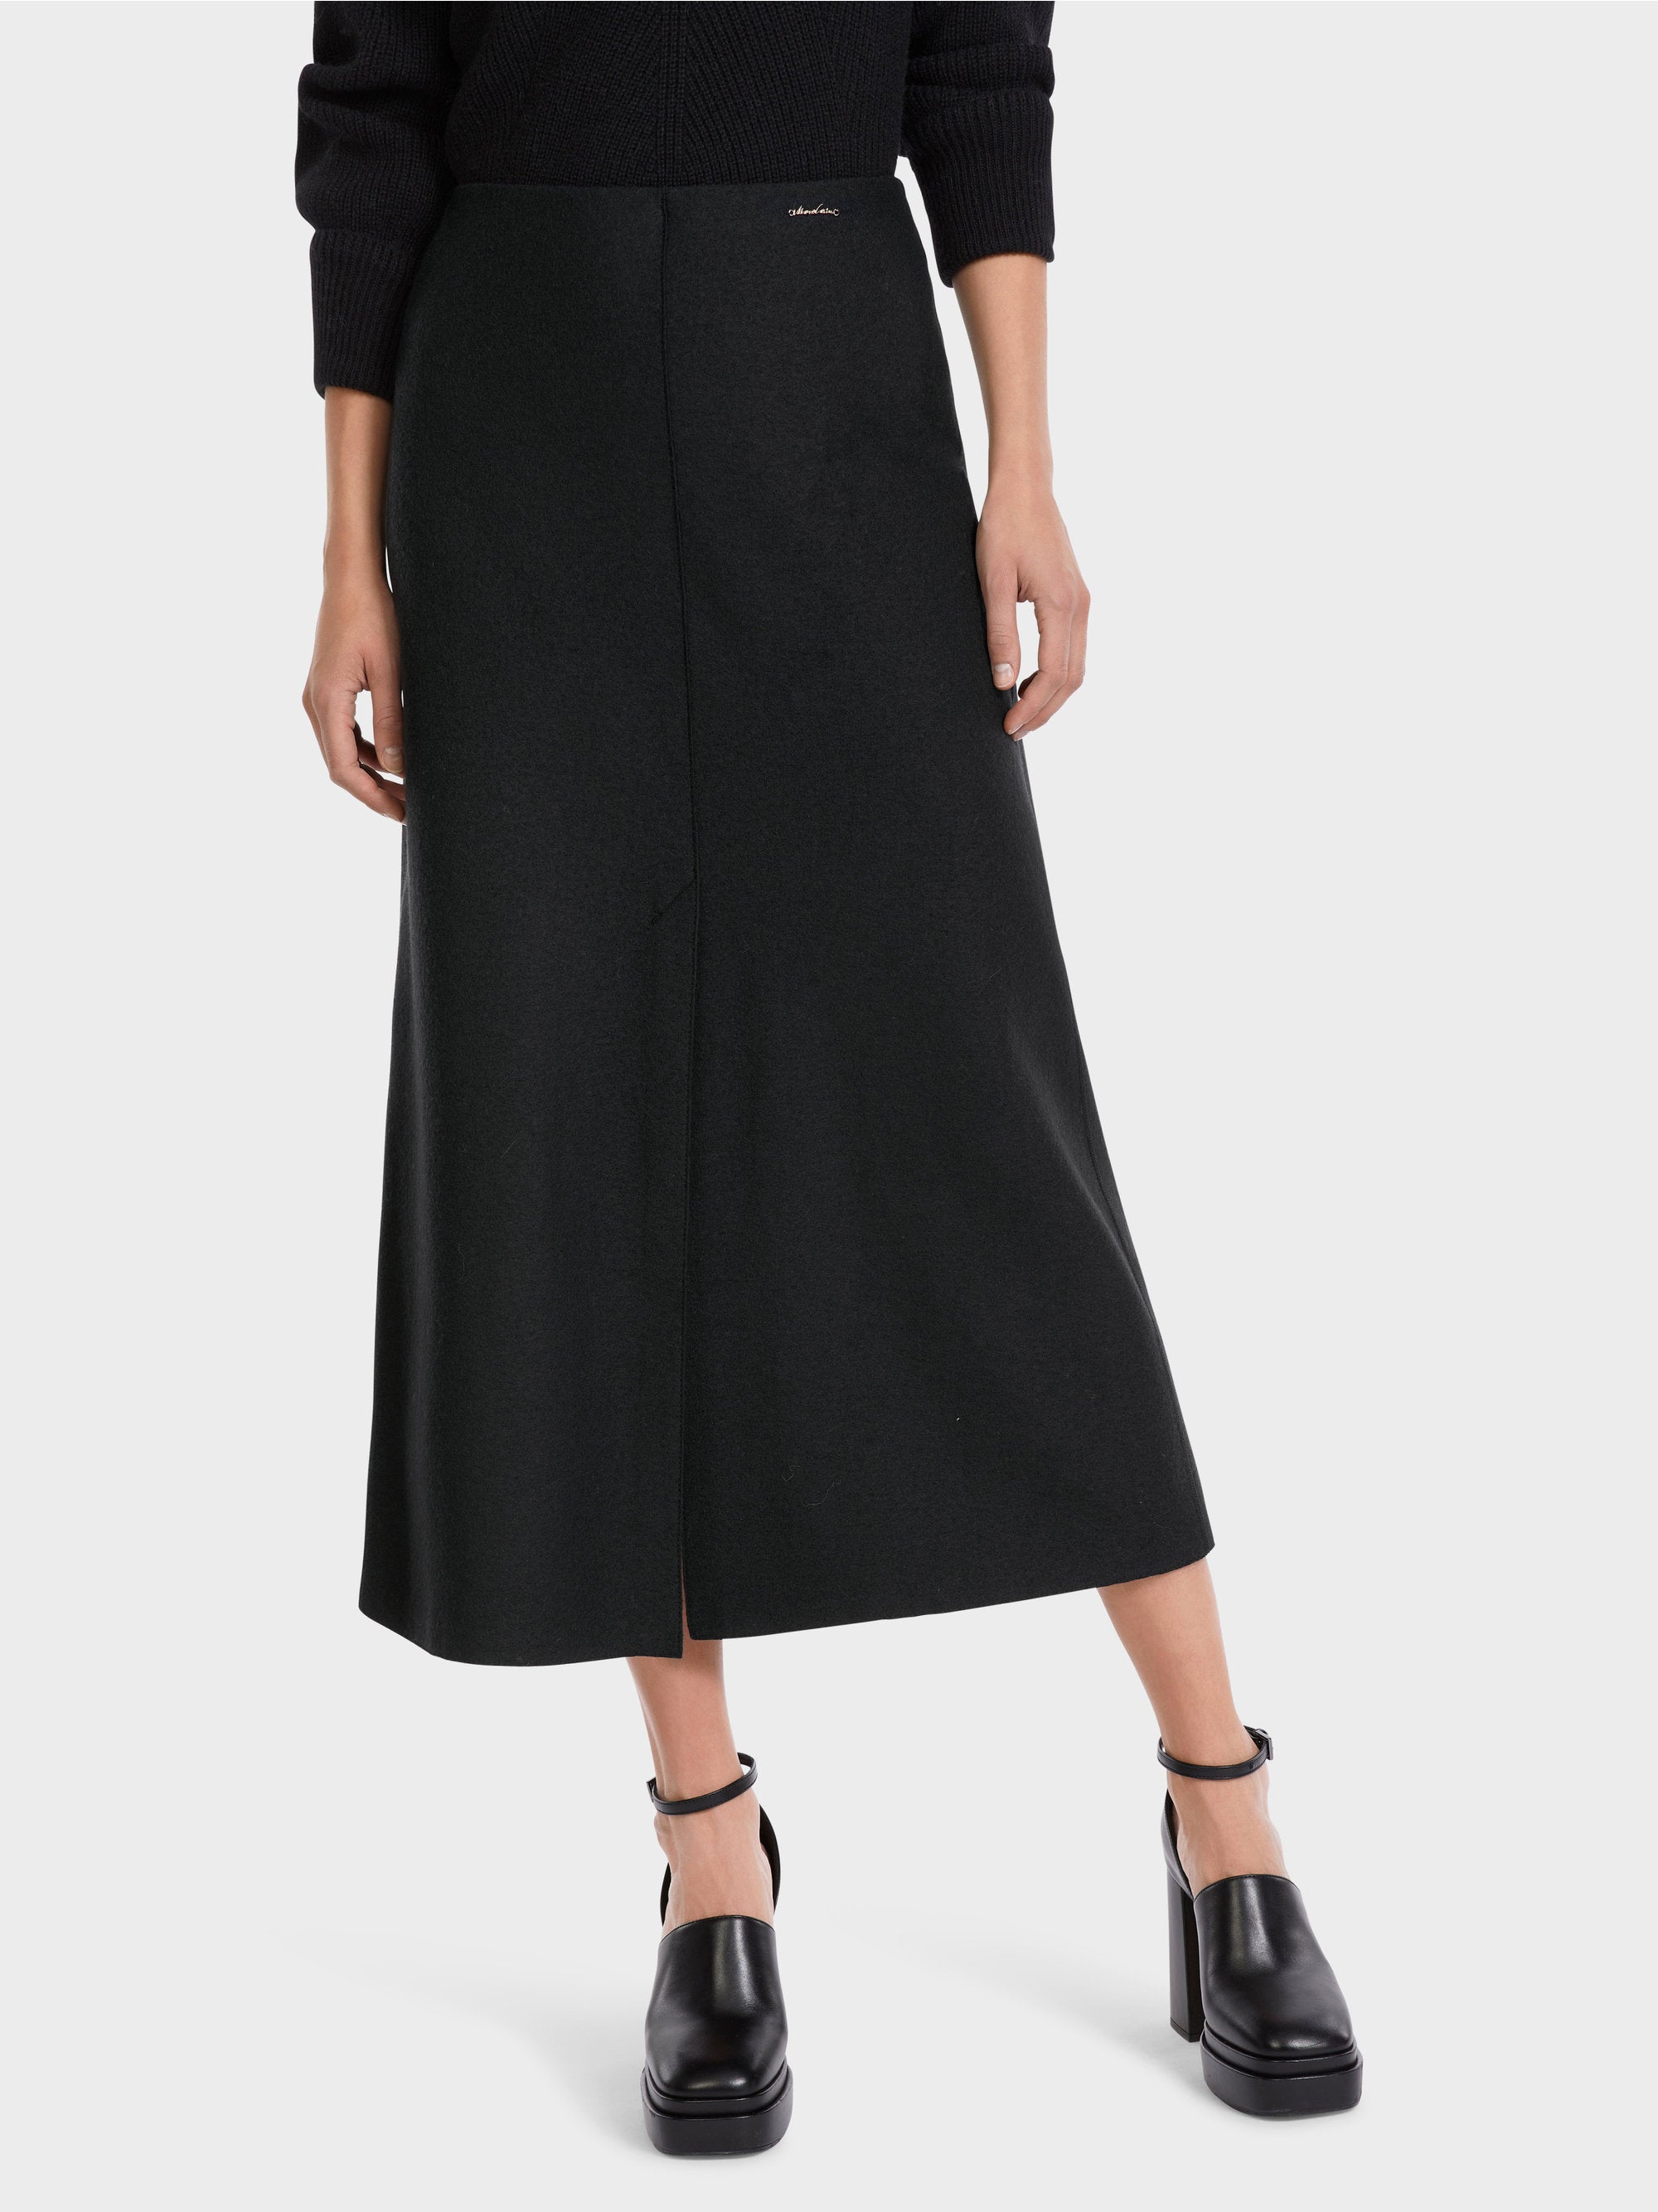 Knee-Length Skirt Knitted In Germany_VC 71.06 W52_900_04